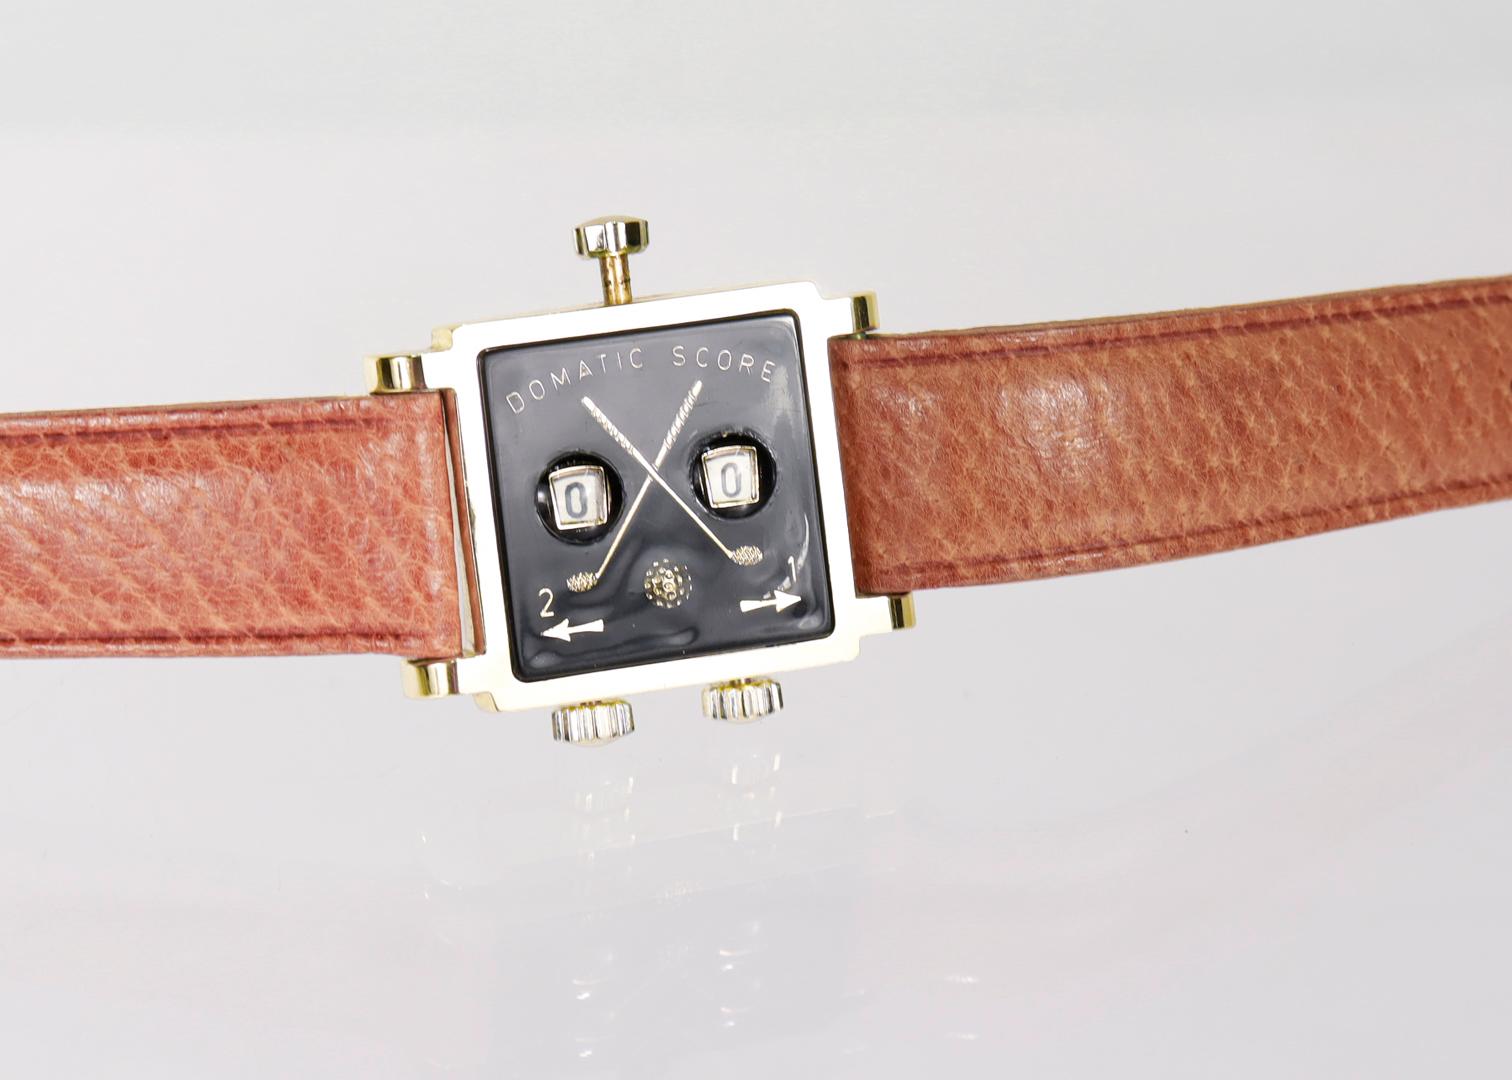 Rare Vintage Swiss Domatic 'Fancy No. 3' Watch Style Golf Score Keeper / Counter For Sale 1